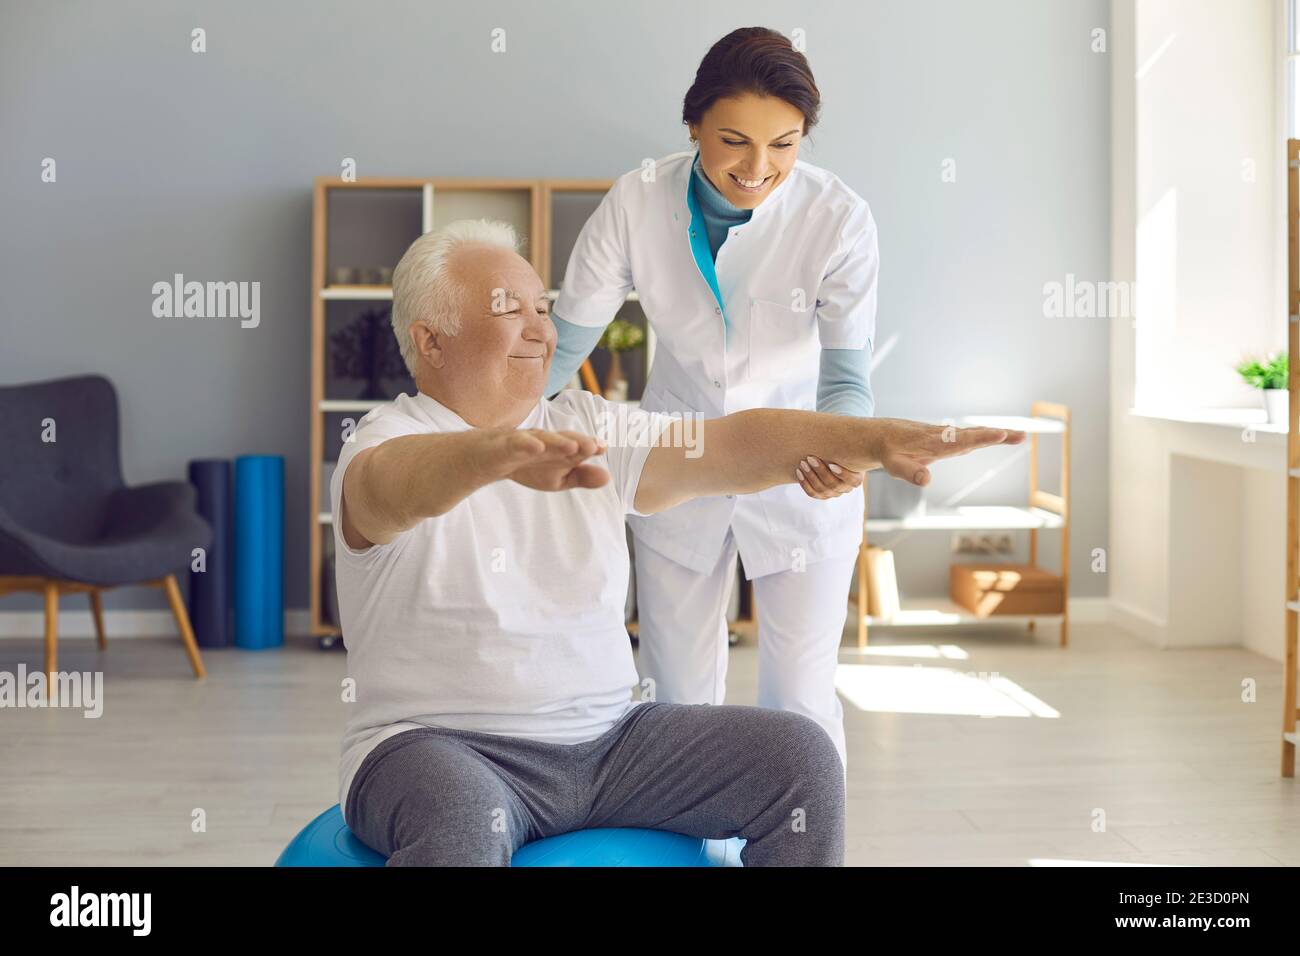 Happy senior man doing medical exercise on fitball with friendly nurse helping him Stock Photo